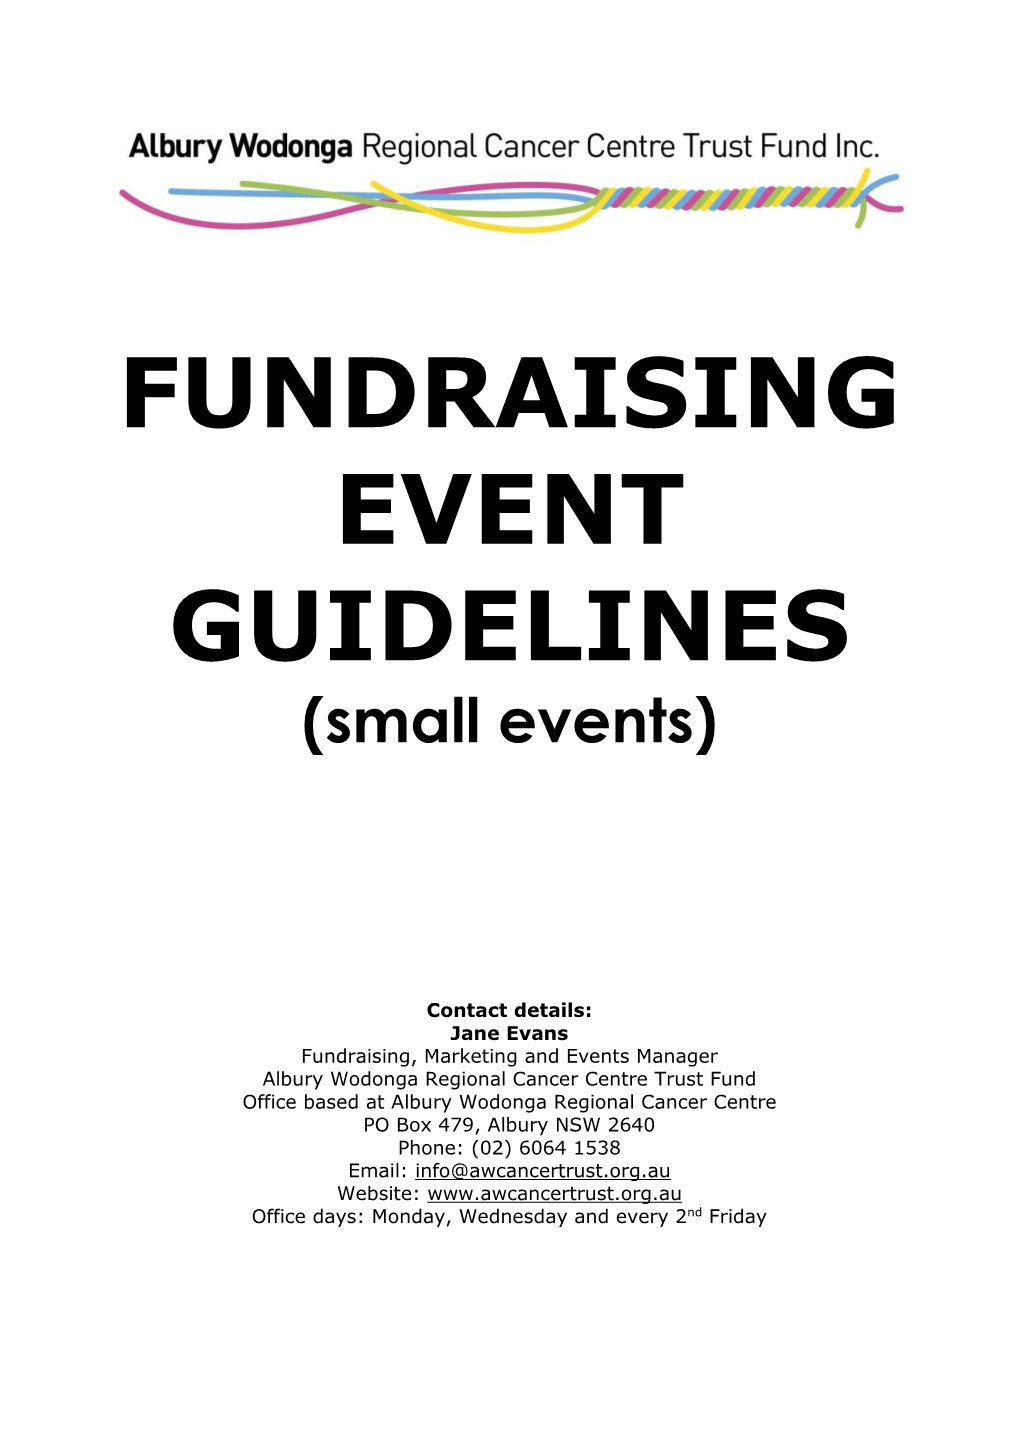 FUNDRAISING EVENT GUIDELINES (Small Events)